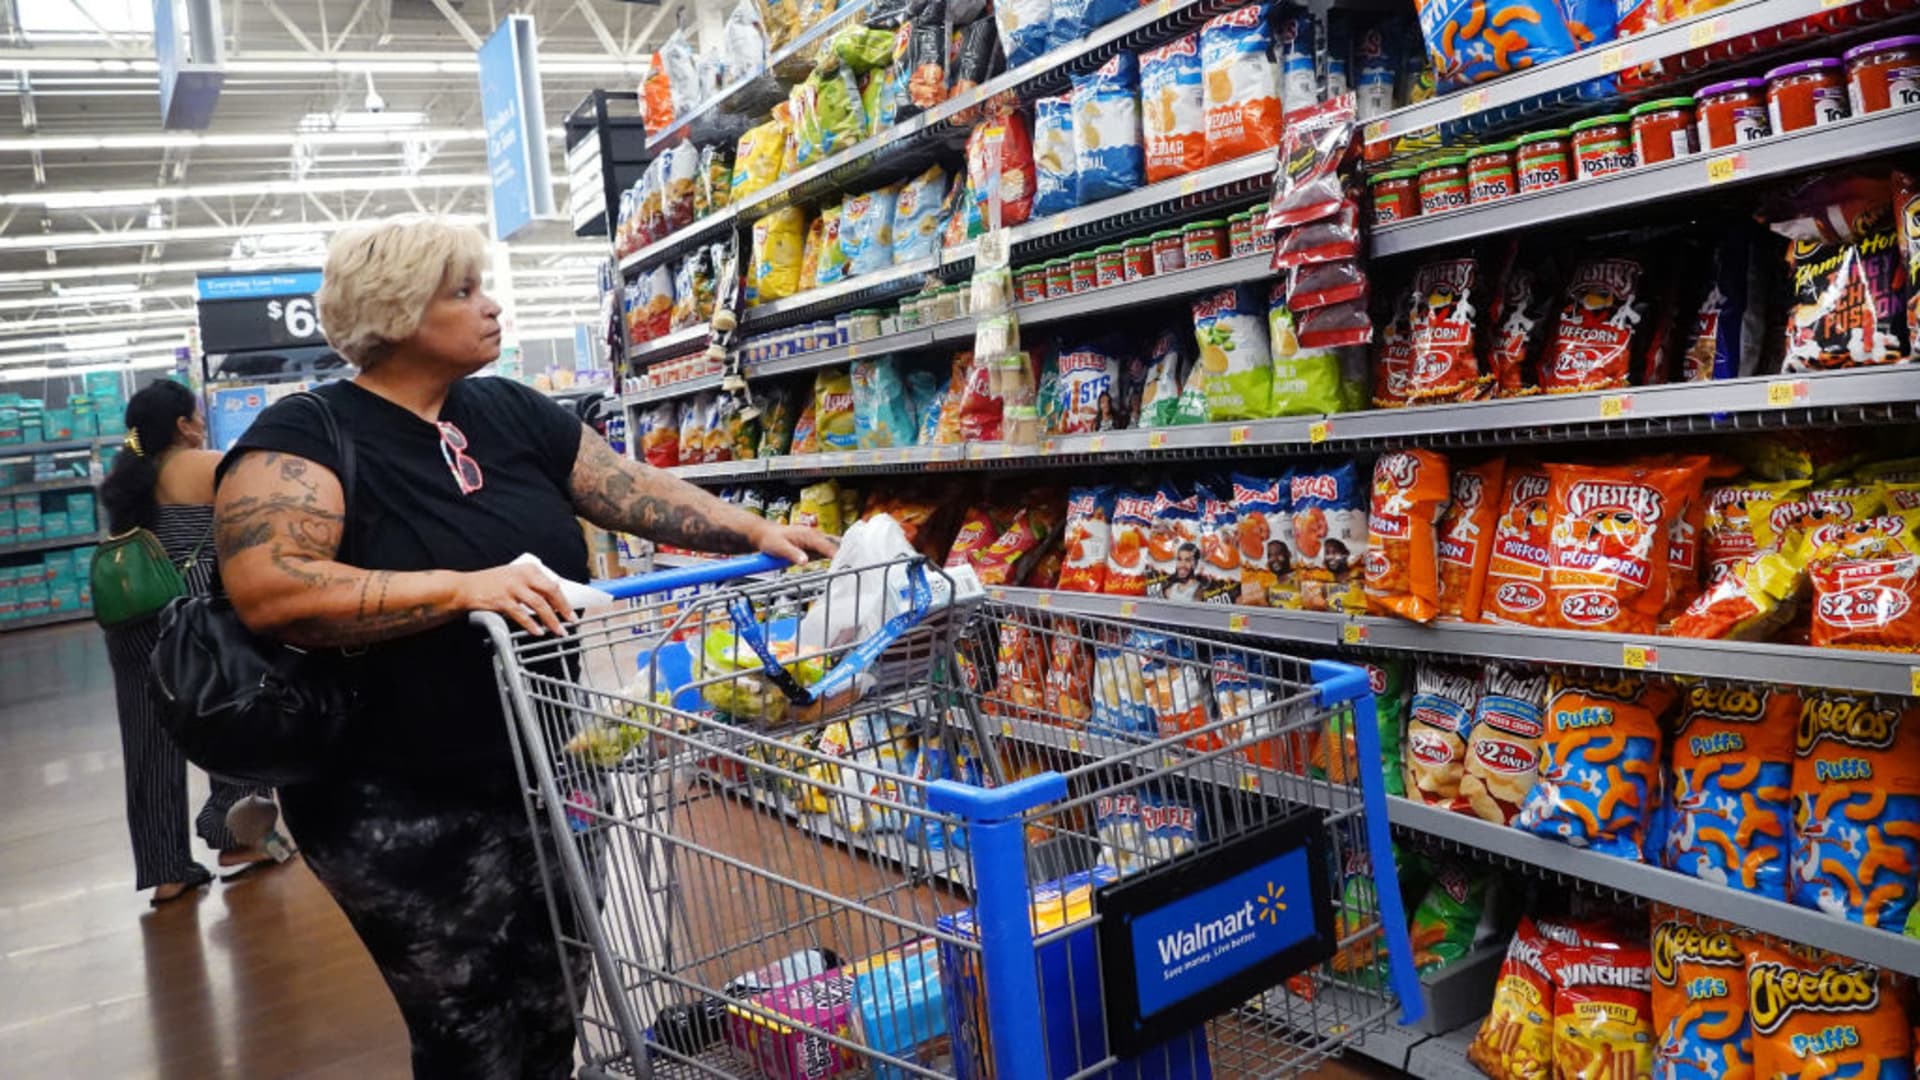 61% of Americans are living paycheck to paycheck â€” inflation is still squeezing budgets